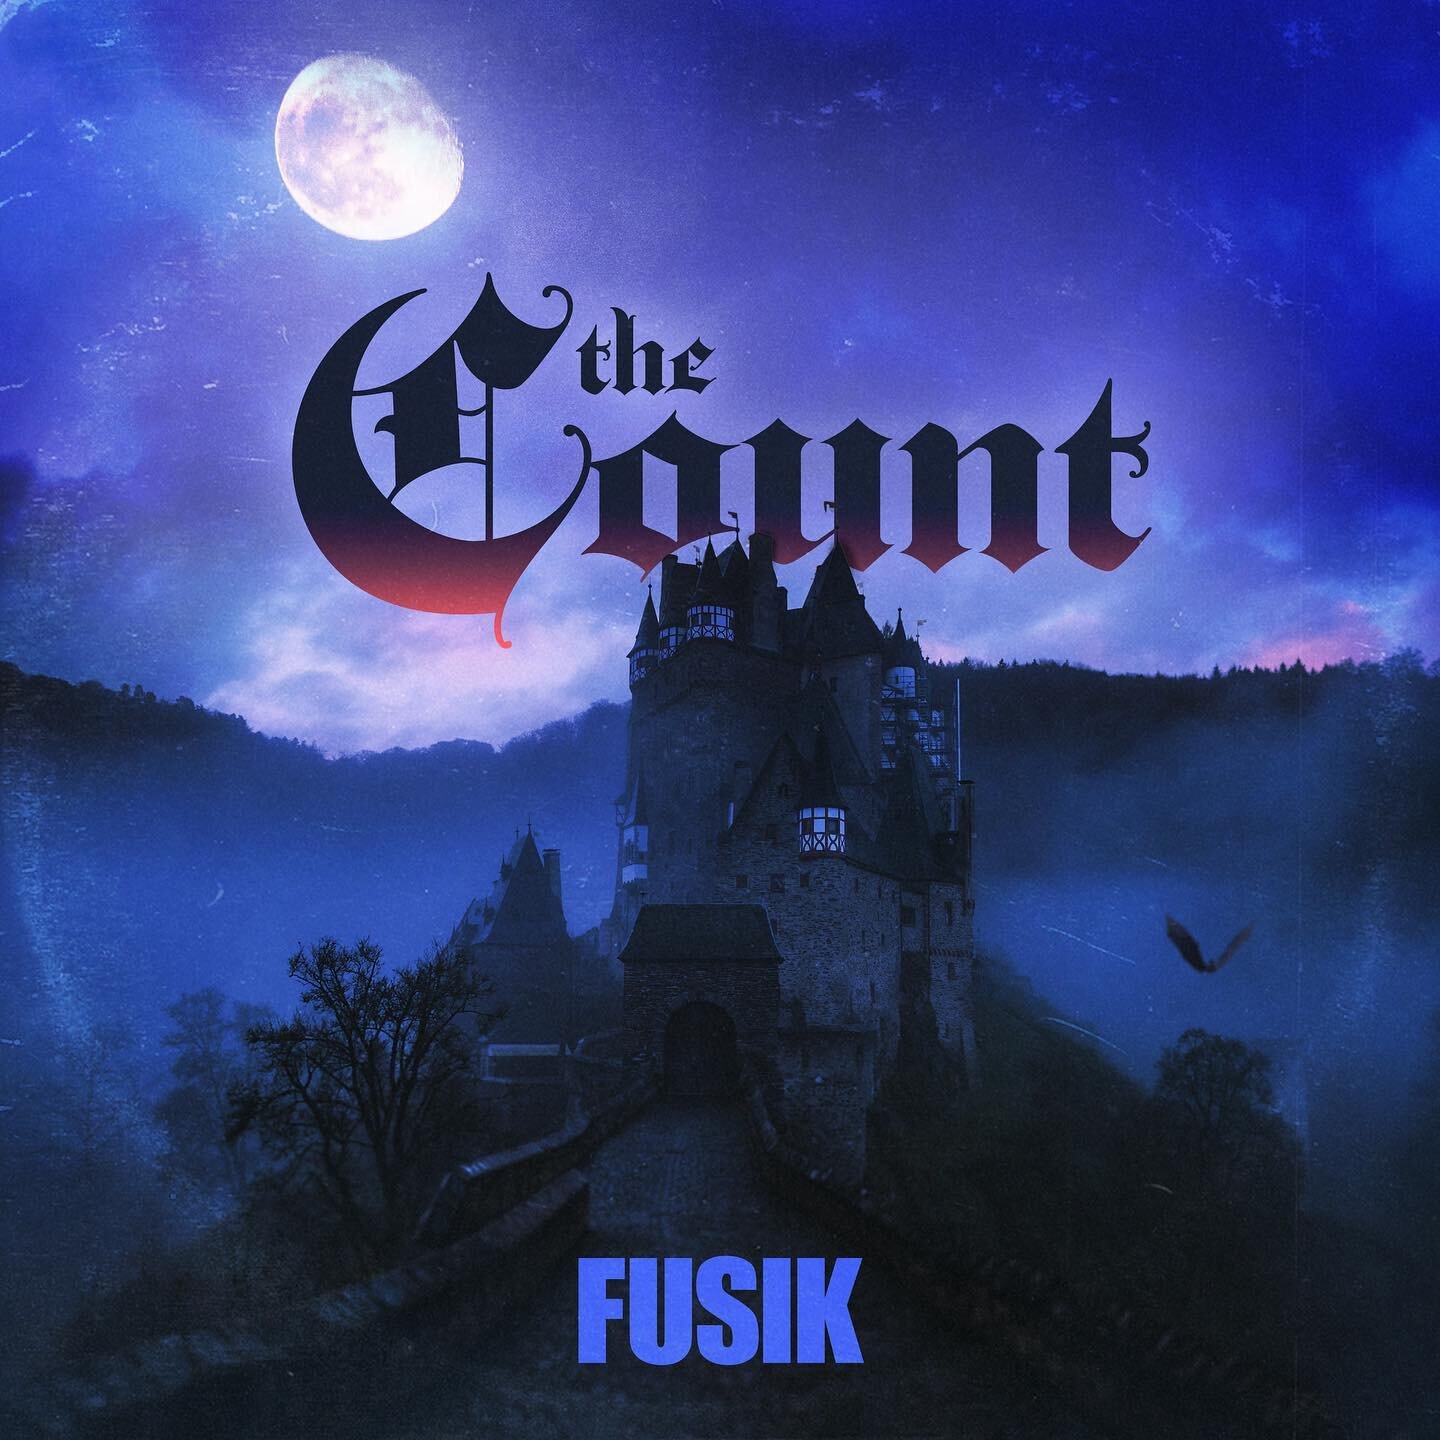 I always look forward to Friday&rsquo;s music releases. I got to create the cover for this one, Fusik&rsquo;s The Count. Streaming everywhere and just in time for Halloween. @fusik 
.
.
.
#albumcover #music #album #art #albumart #coverart #artwork #g